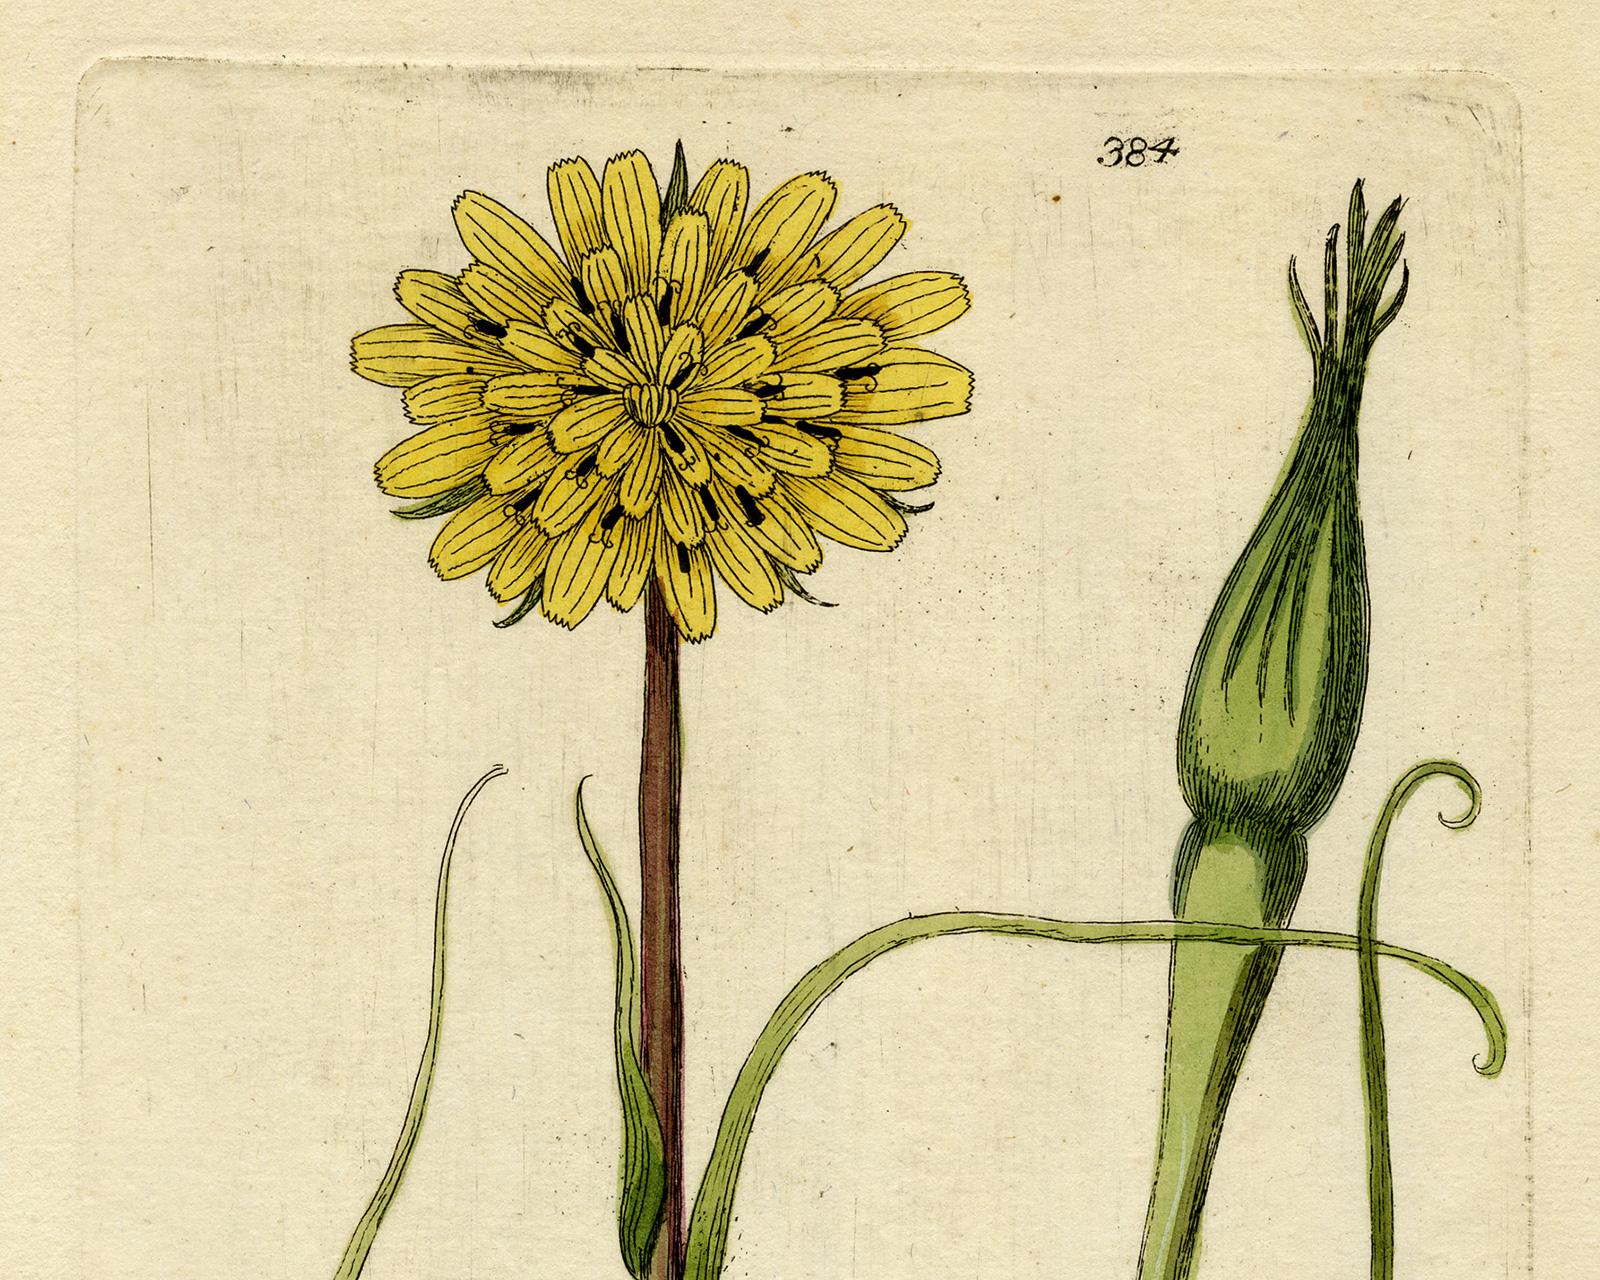 Meadow Salsify from Medicinal Plants by Happe - Handcoloured engraving - 18th c. - Old Masters Print by Andreas Friedrich Happe